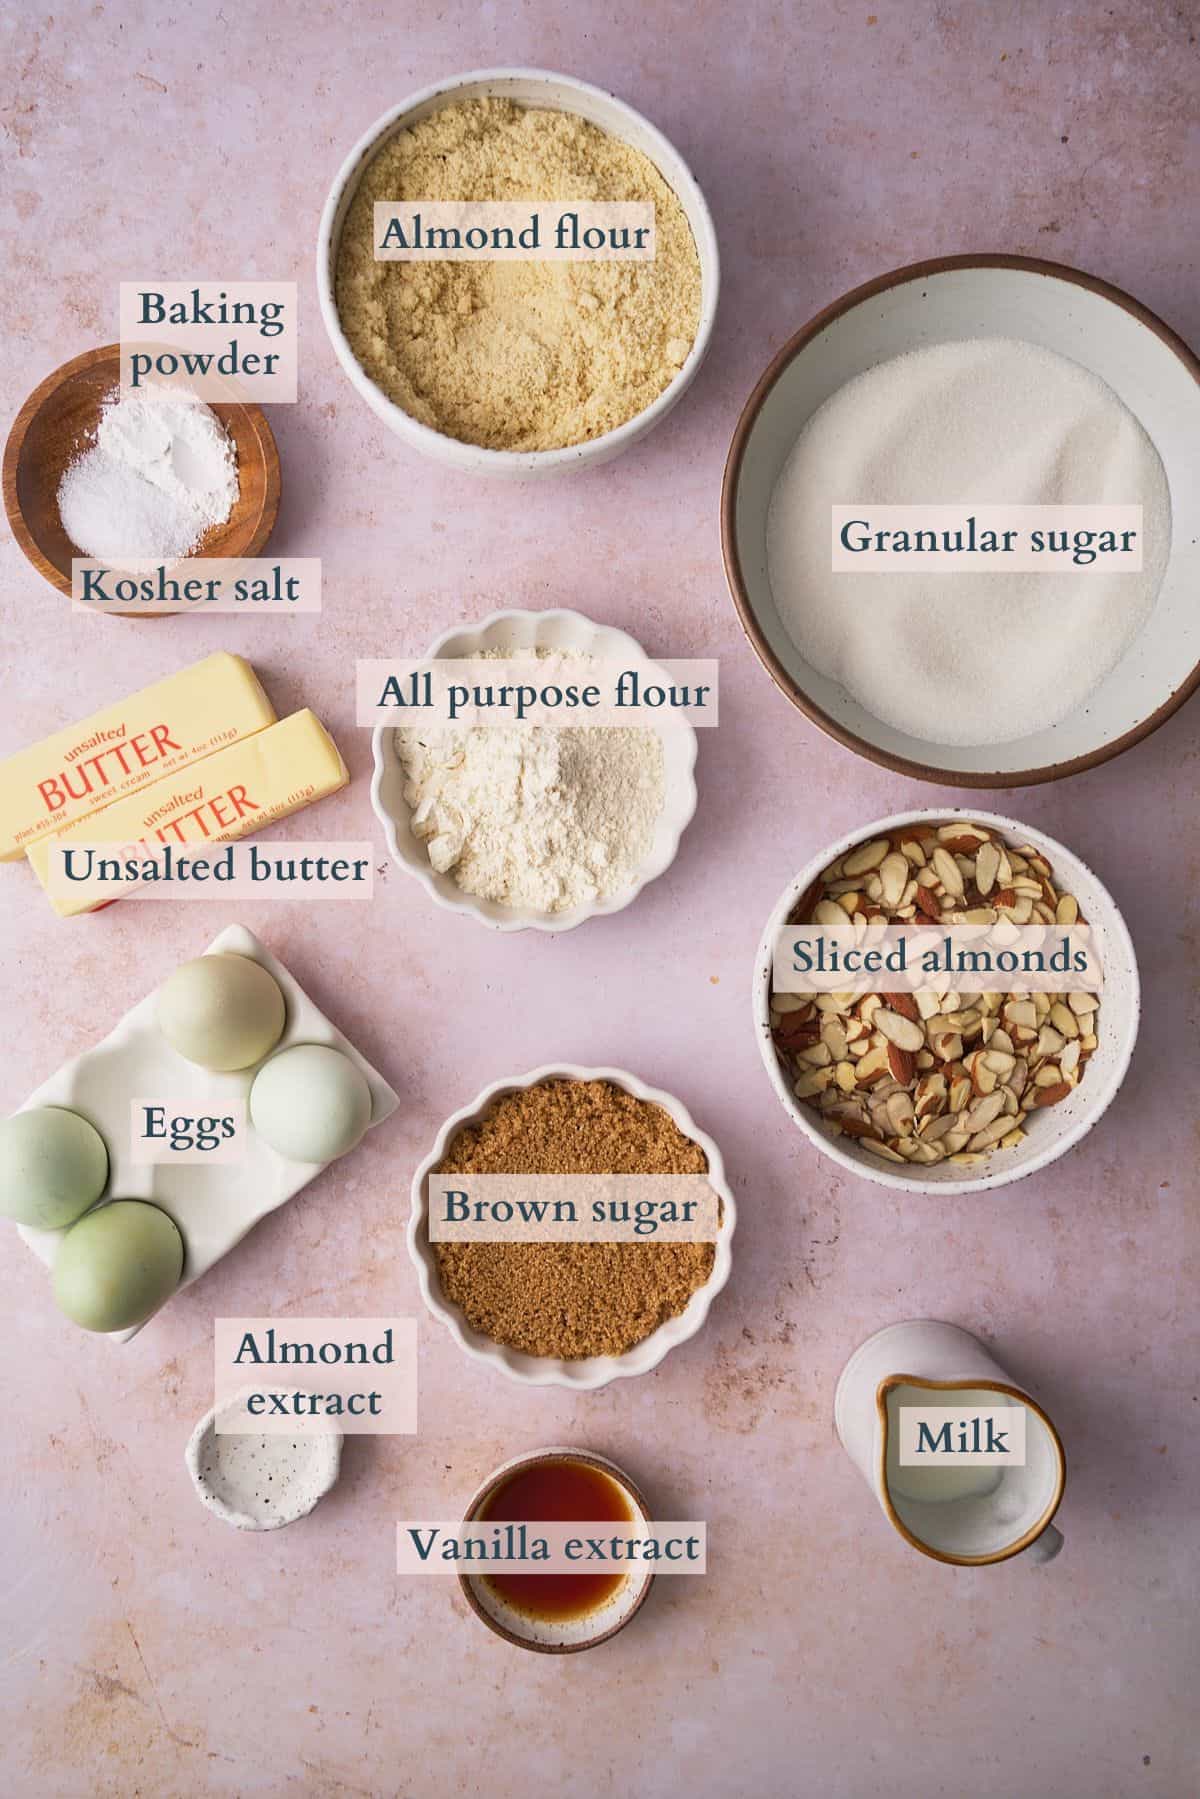 Ingredients to make Swedish almond cake laid out on a table in small bowls and labeled to denote each ingredient.